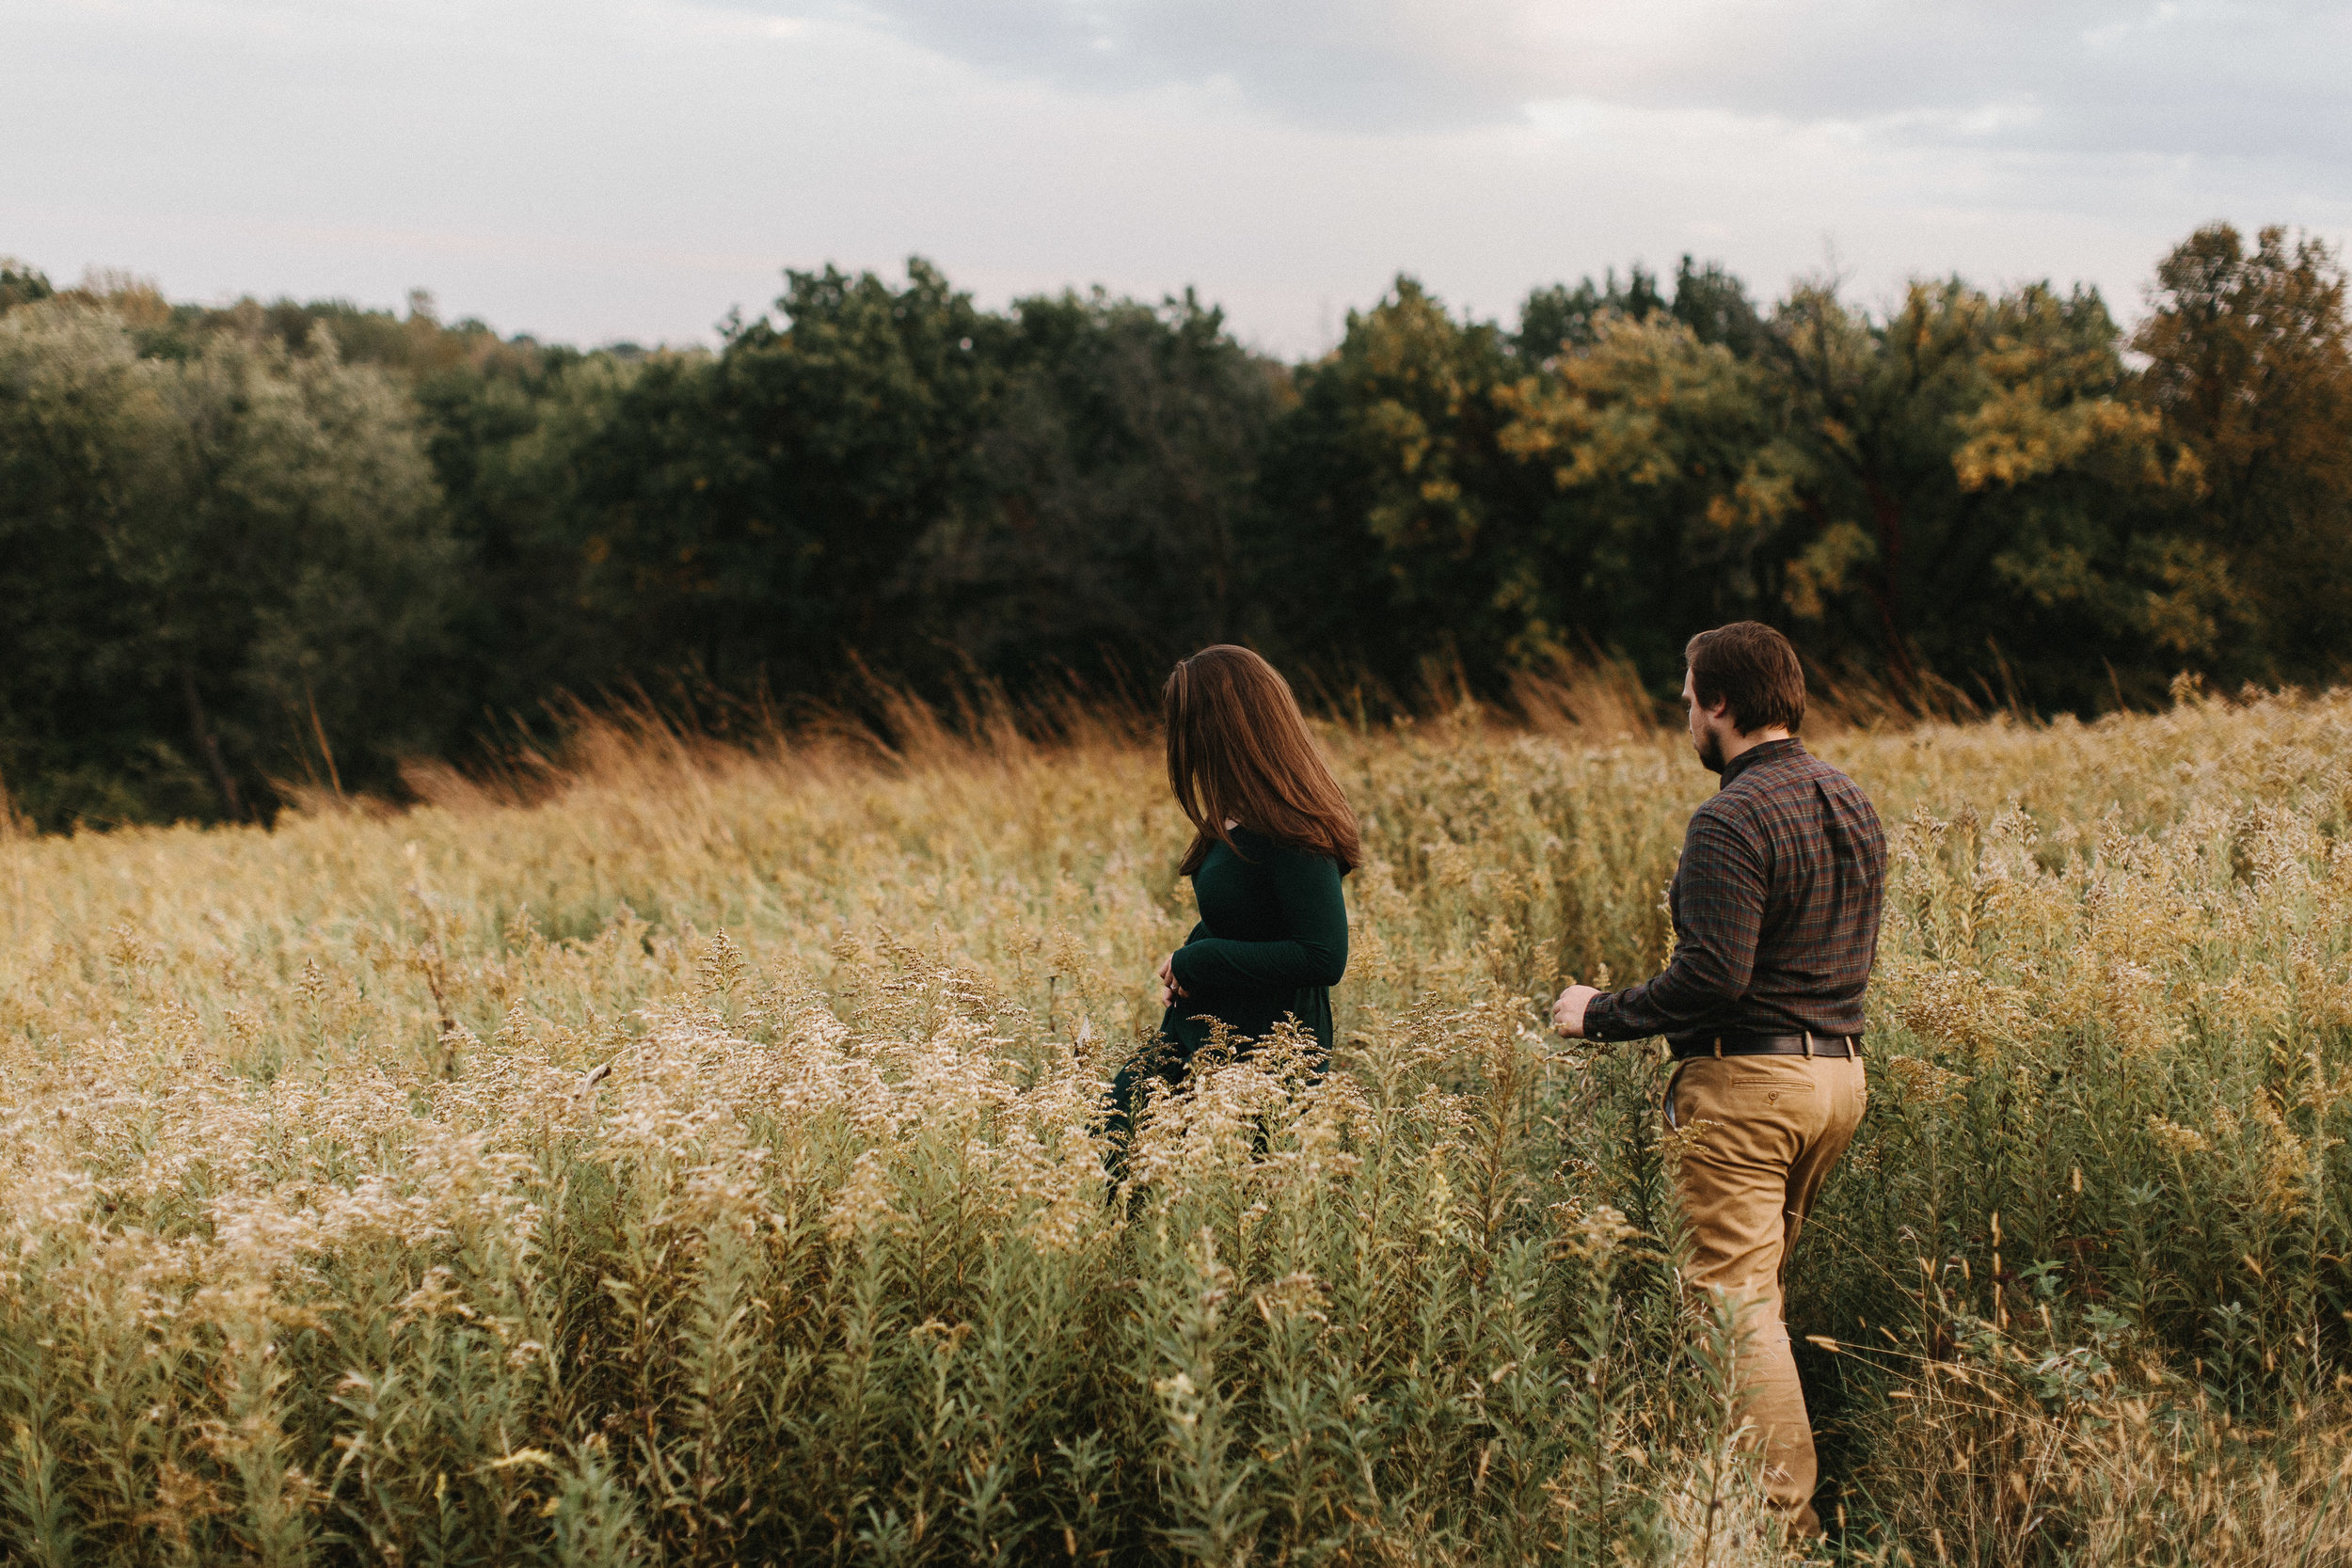 iowa_city_engagement_adventure_prairie_graduate_at_home_dog_couples_downtown_wilsons_orchard_1236.jpg